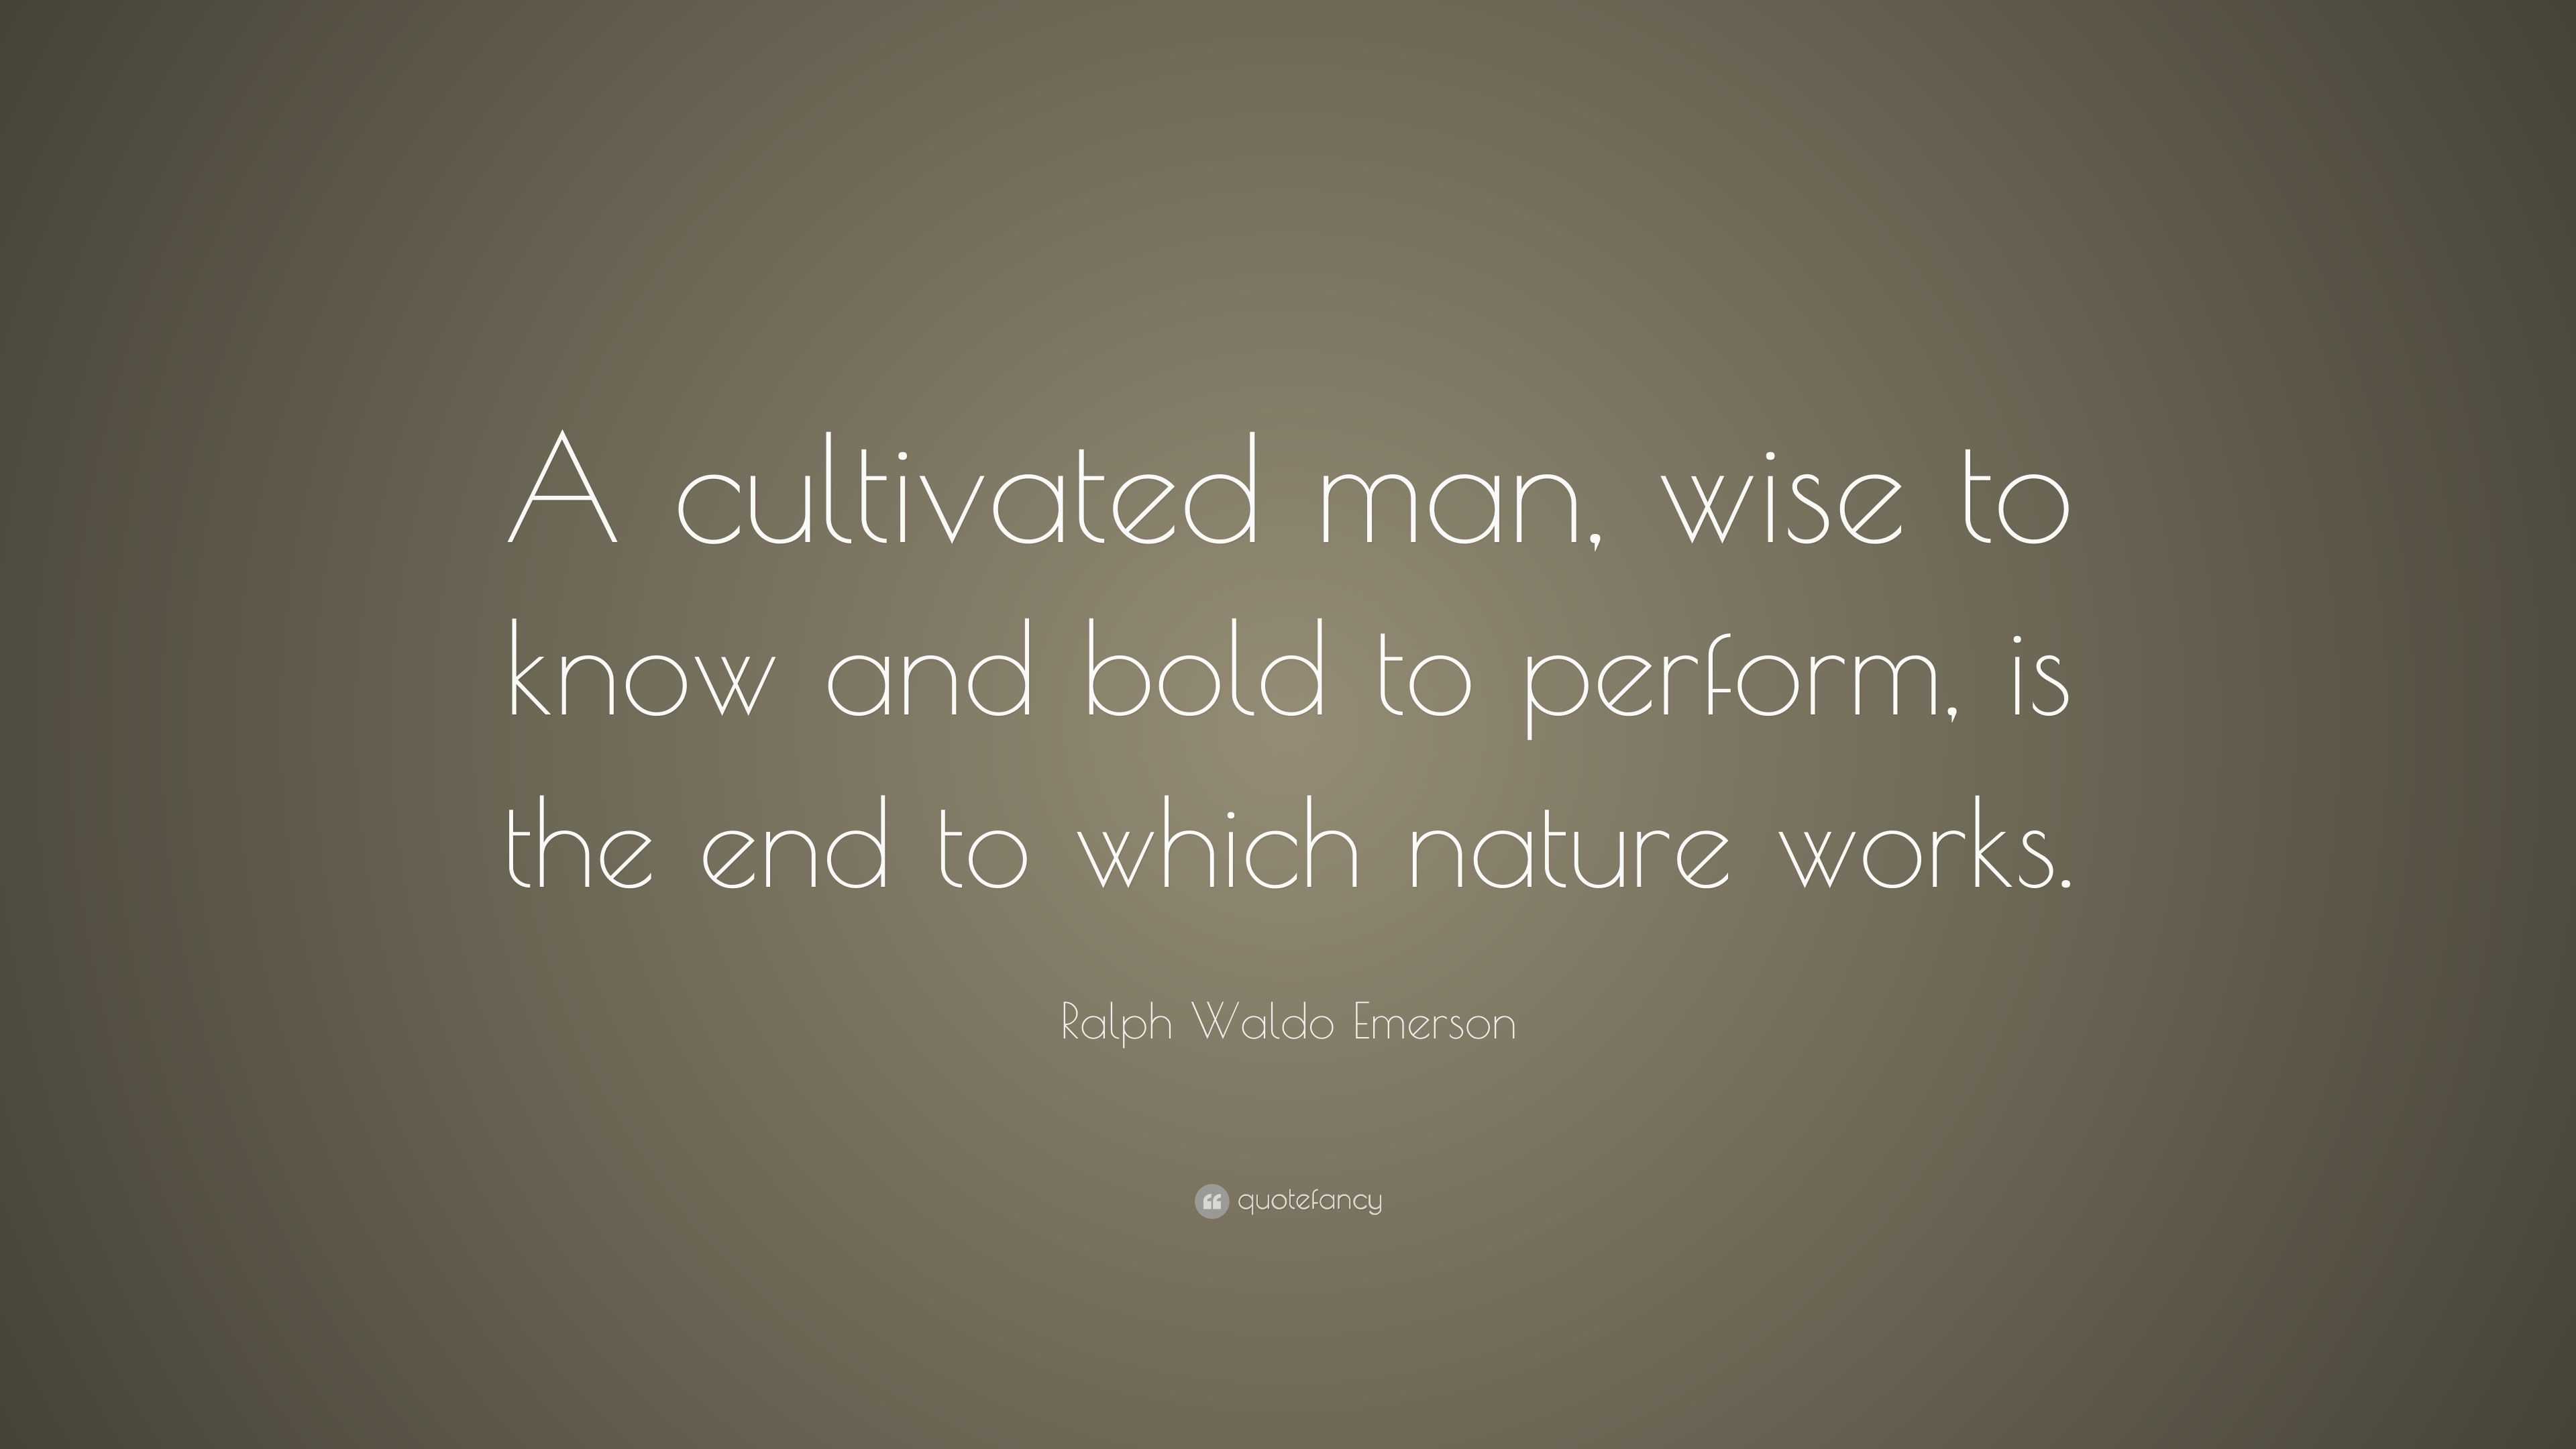 Ralph Waldo Emerson Quote: “A cultivated man, wise to know and bold to ...